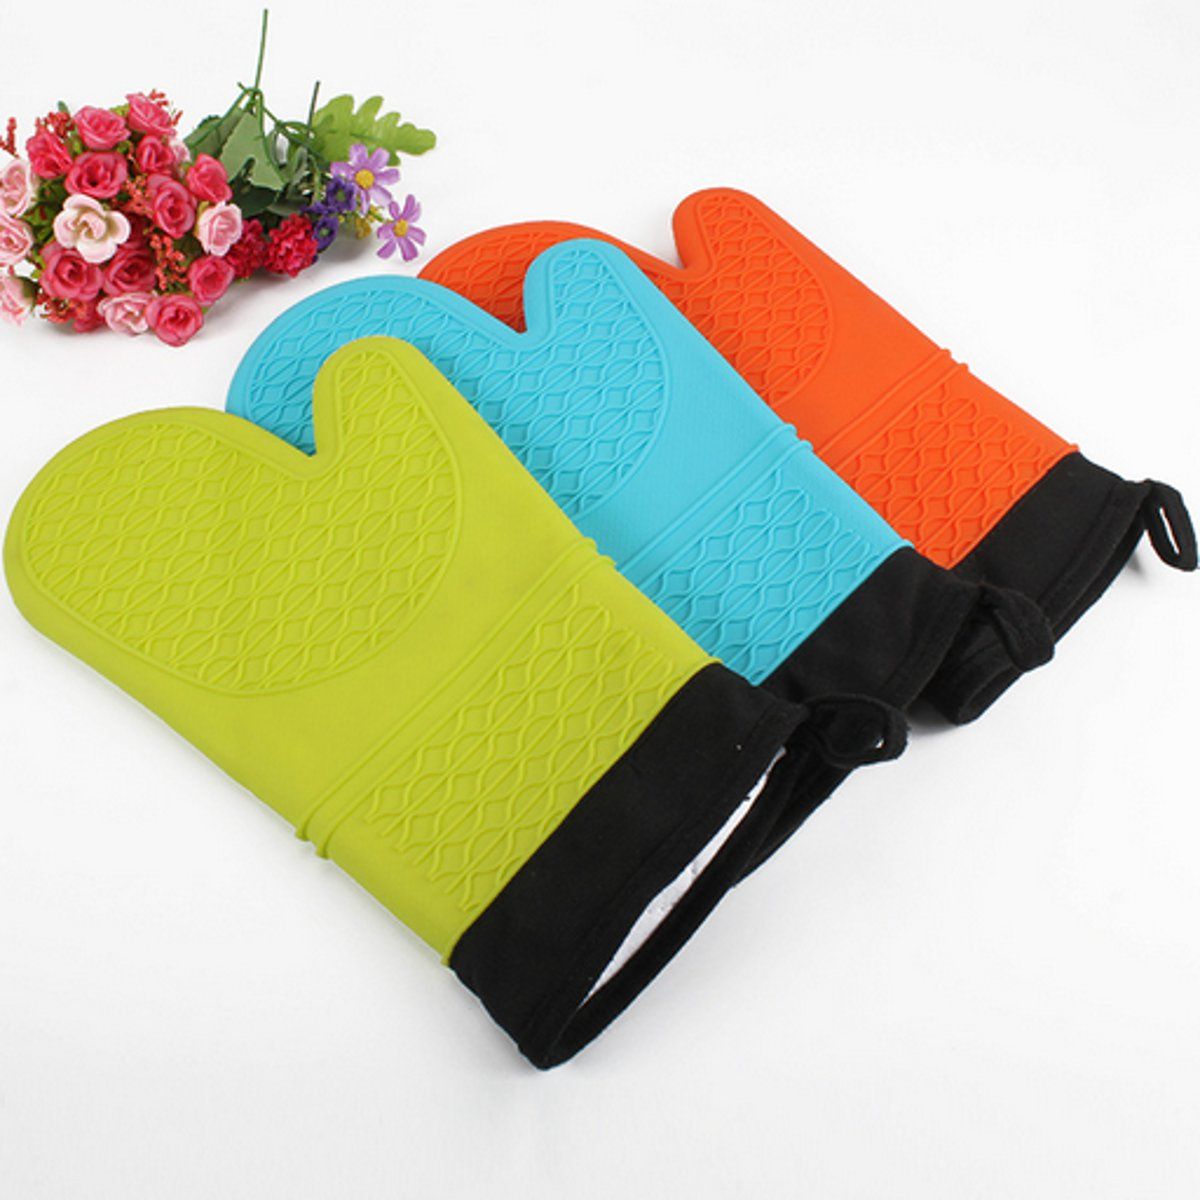 1-Pair-Heat-Resistant-Oven-Glove-Kitchen-BBQ-Cooking-Grilling-Baking-Mitt-Silicone-Fabric-Glove-1151604